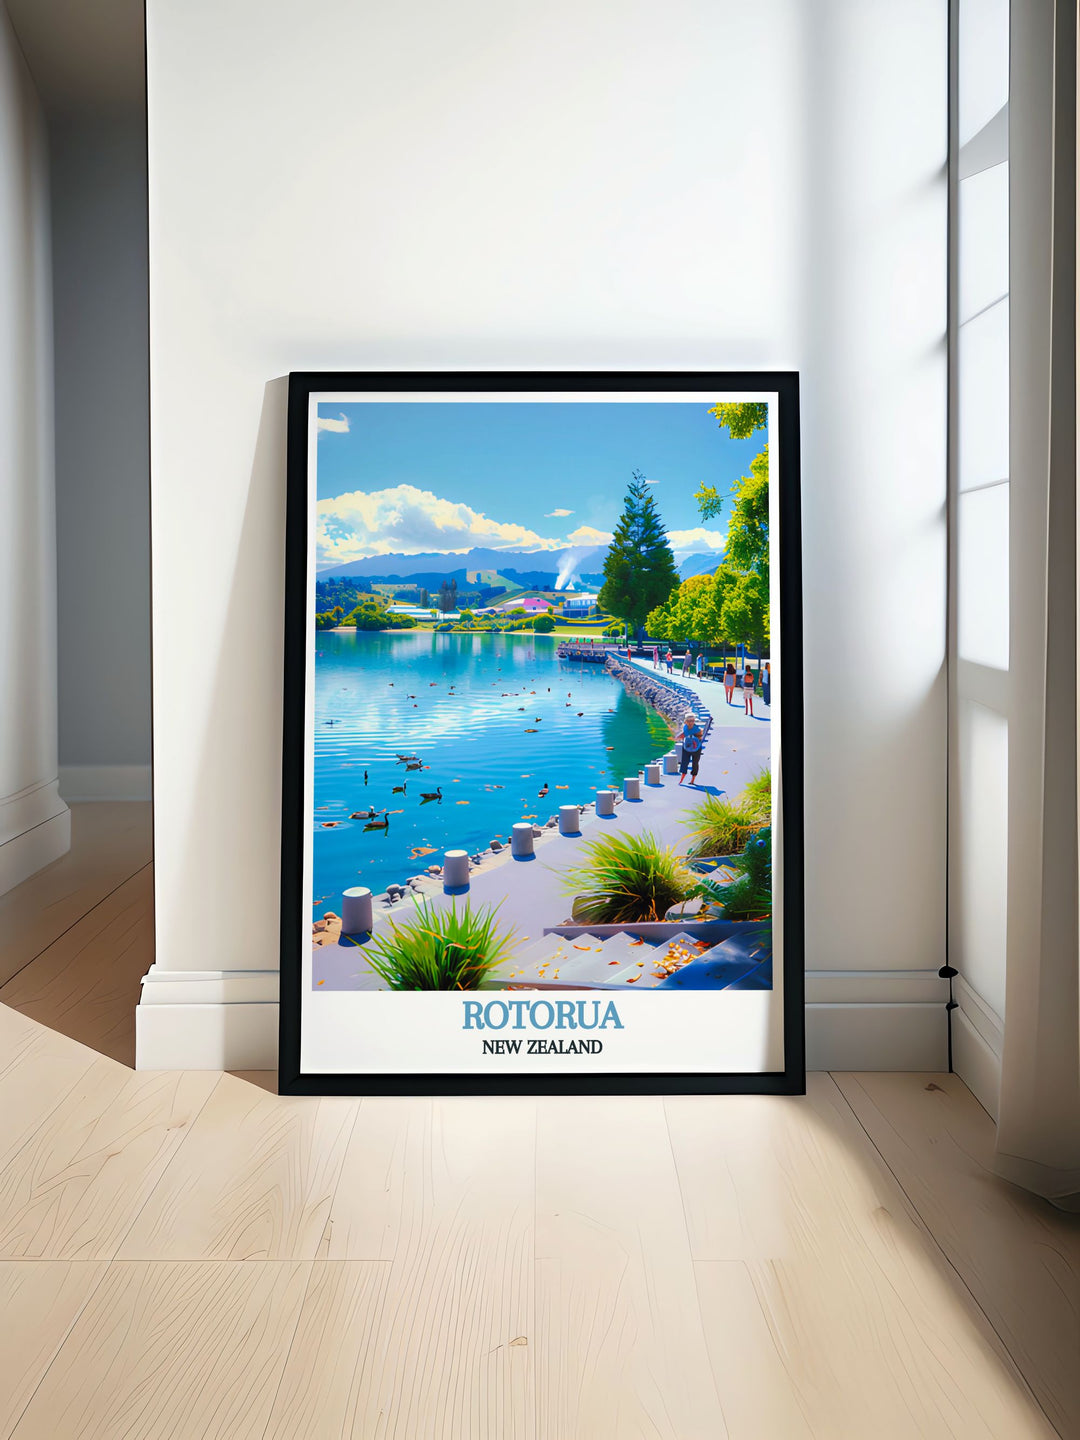 A stunning Lake Rotorua travel poster featuring the serene waters and vibrant landscapes of Rotorua New Zealand. Perfect for adding a touch of natural beauty to your home decor. Ideal for those who appreciate New Zealand art and want to bring the outdoors inside.